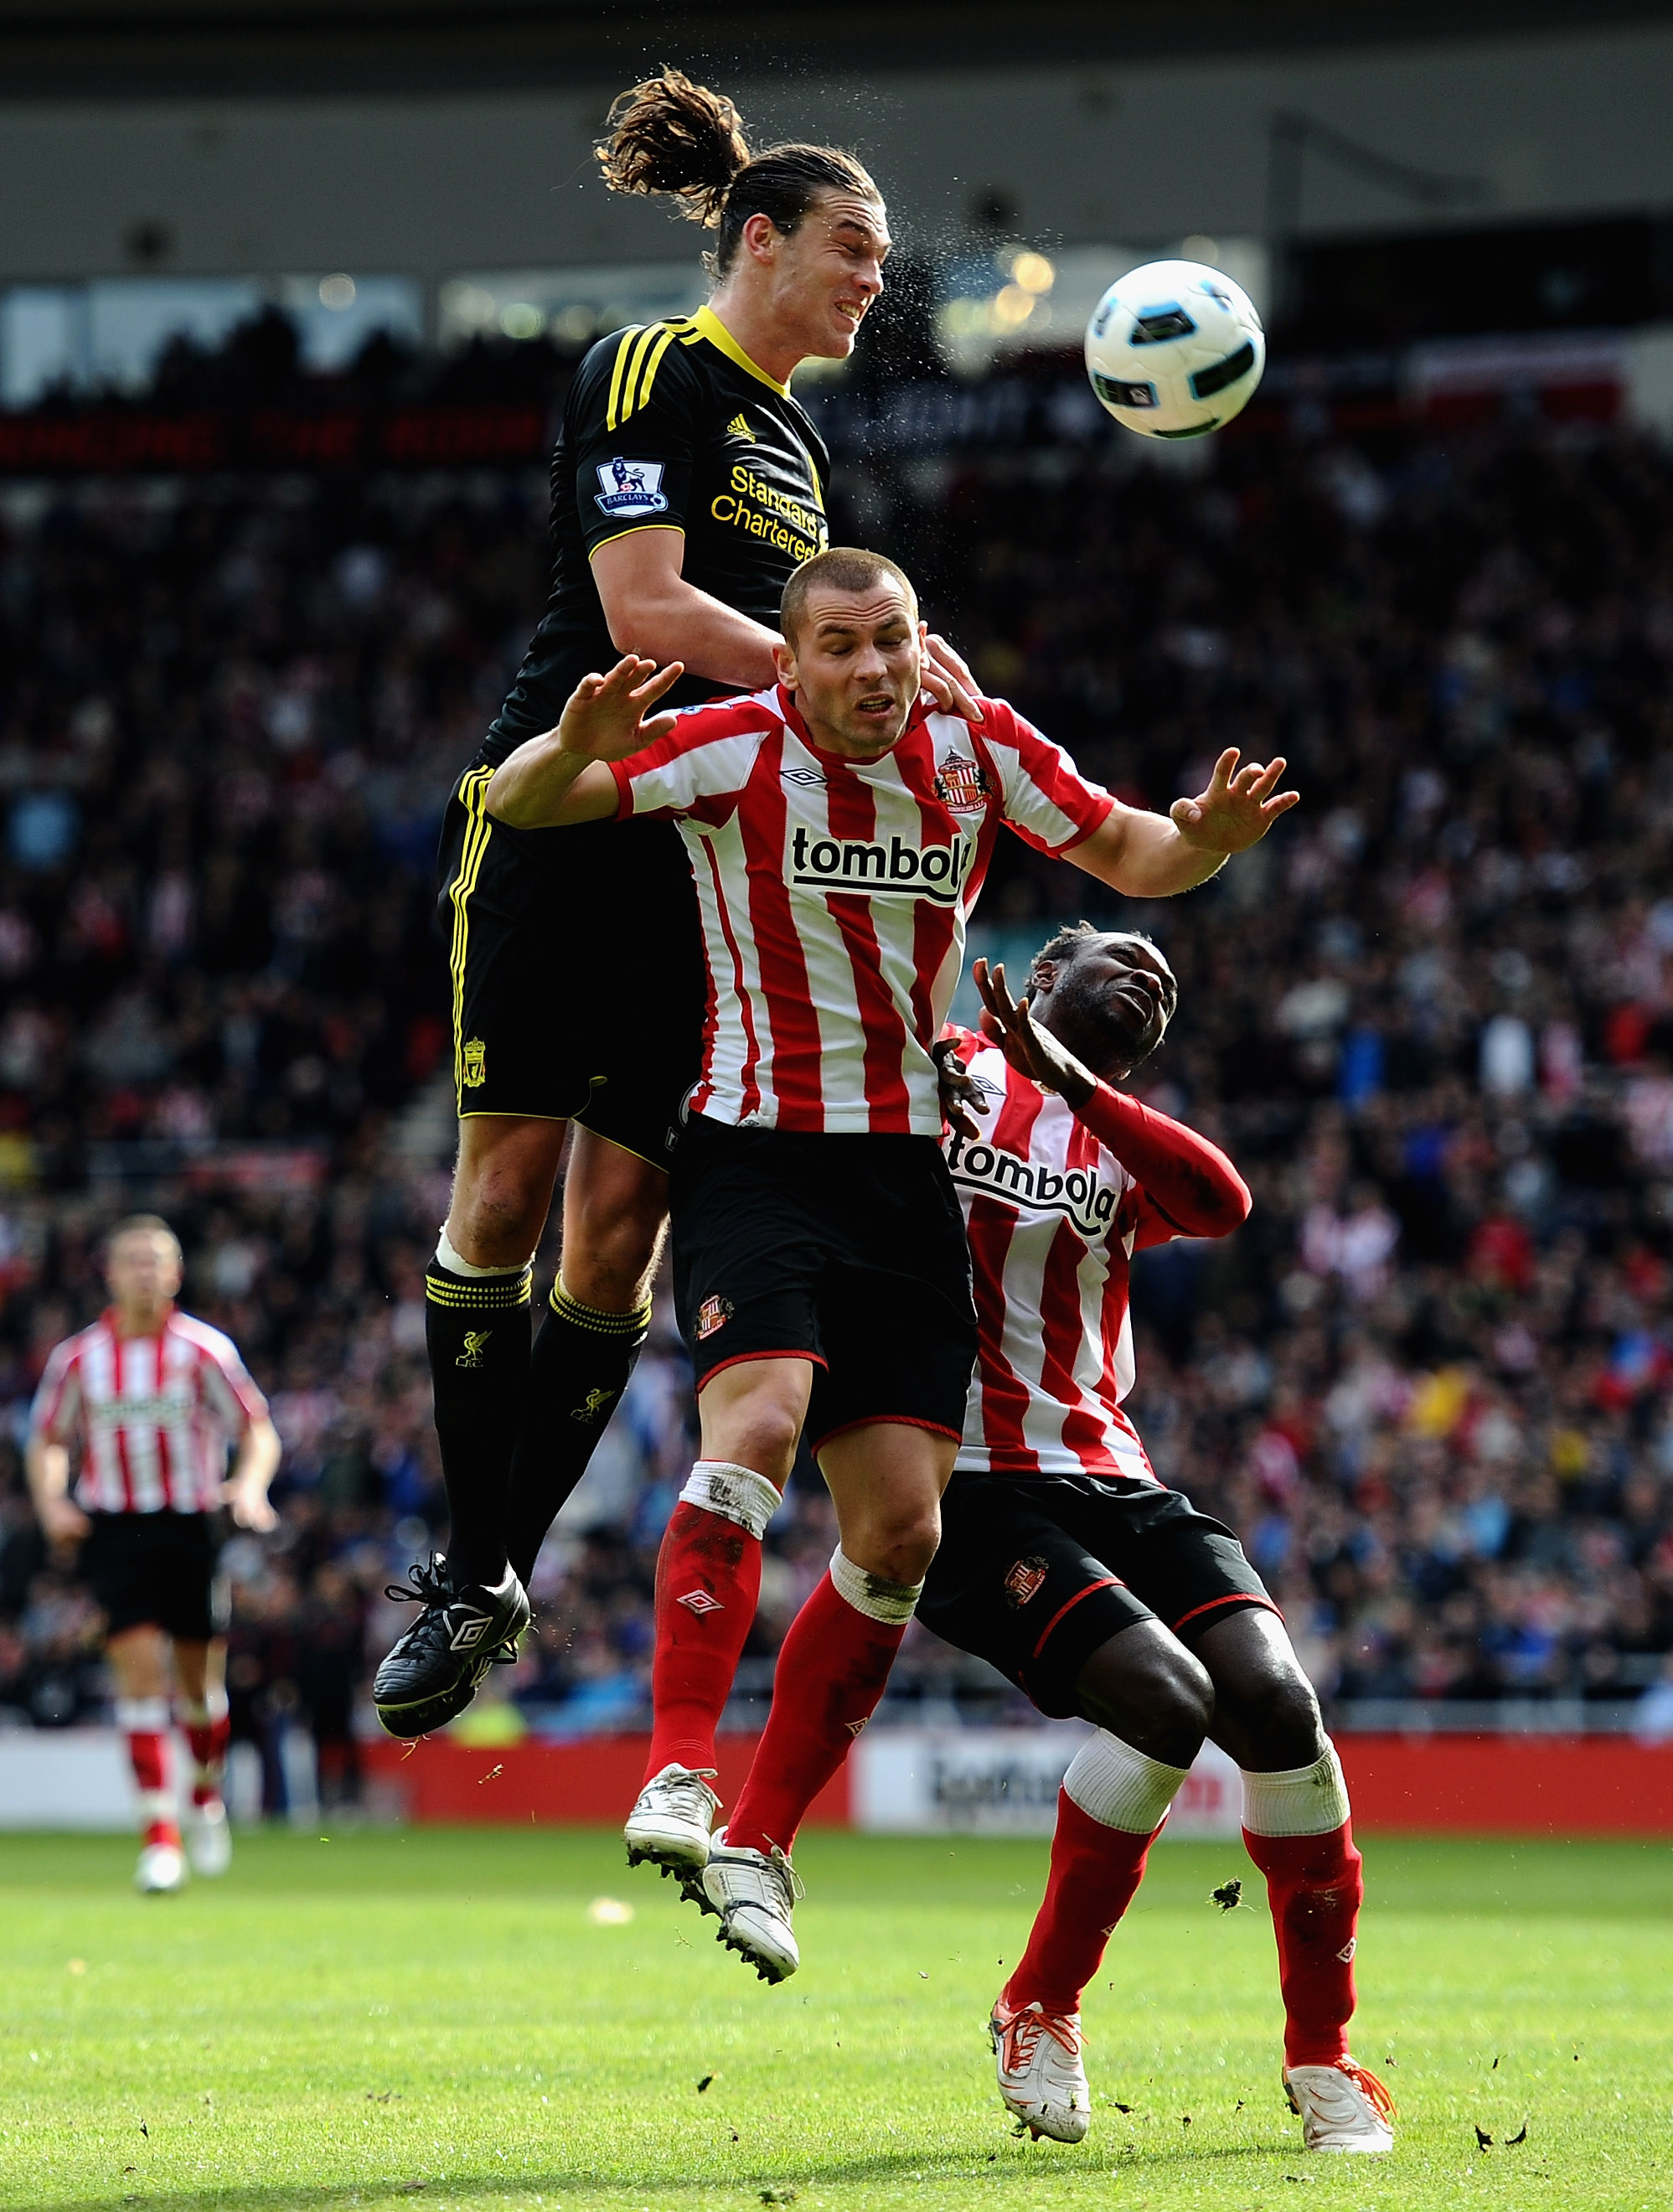 SUNDERLAND, ENGLAND - MARCH 20: Andy Carroll of Liverpool battles with Phil Bardsley and John Mensah of Sunderland during the Barclays Premier League match between Sunderland and Liverpool at the Stadium of Light on March 20, 2011 in Sunderland, England.